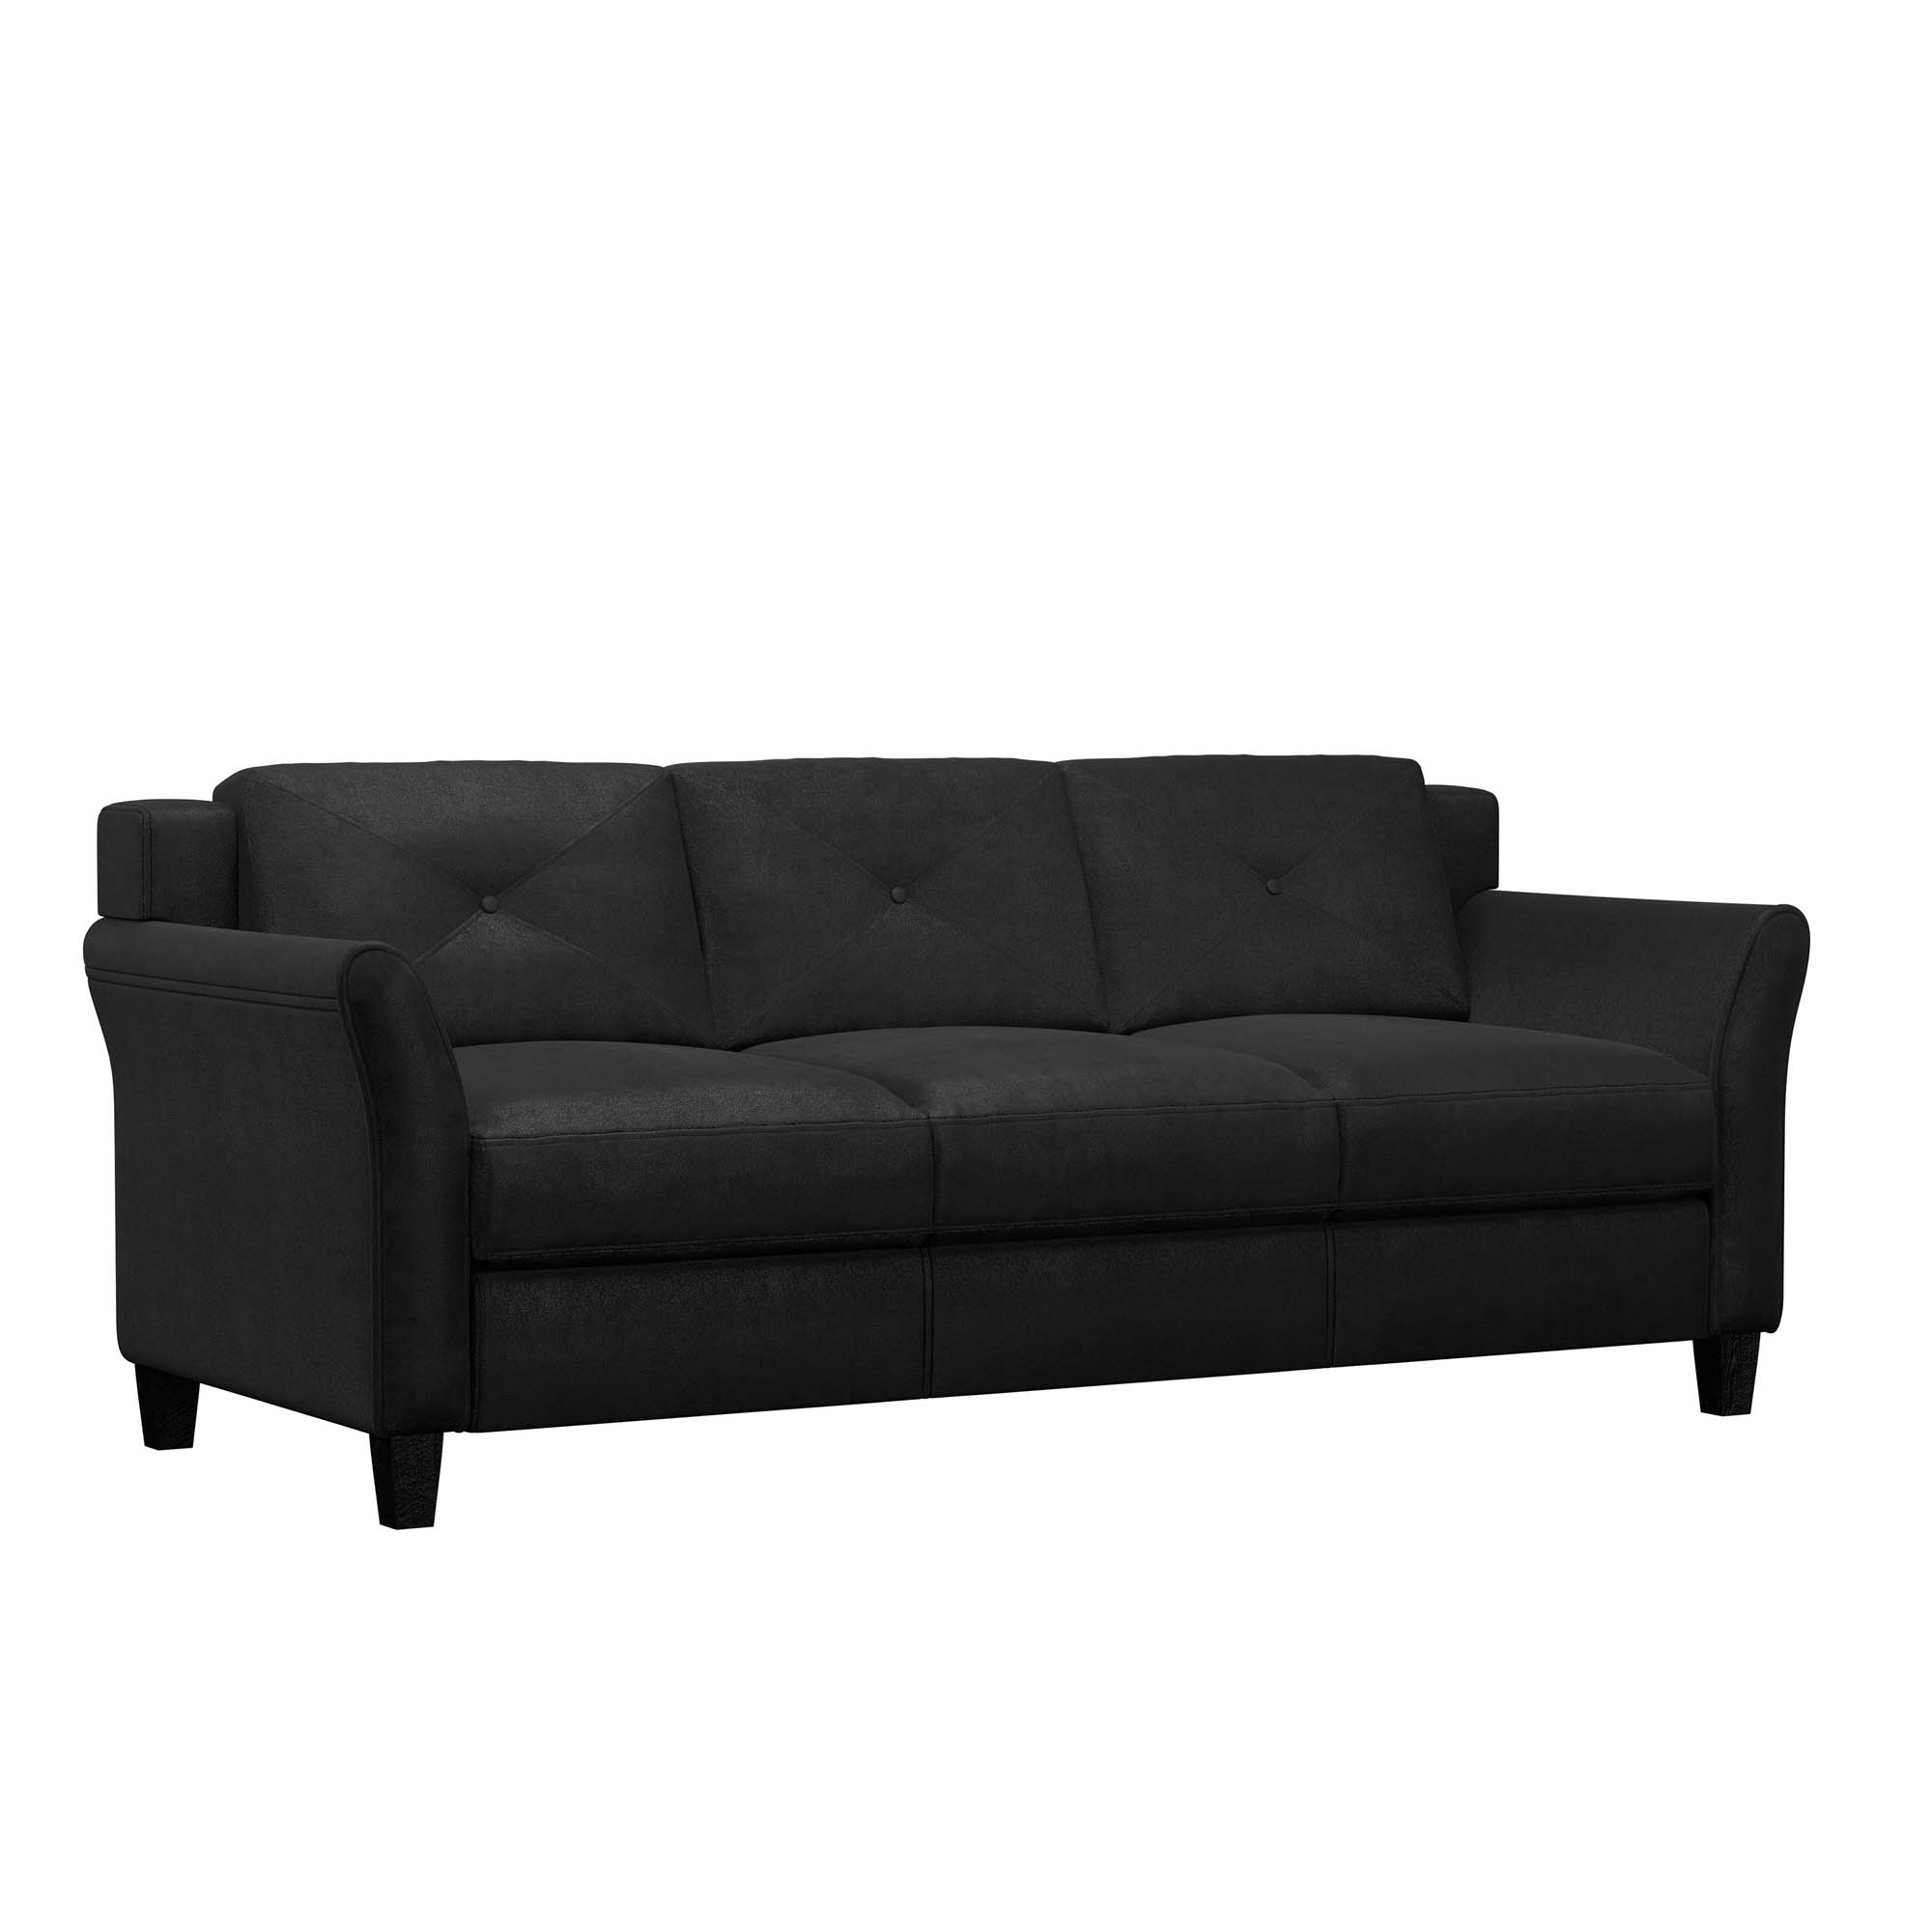 Lifestyle Solutions Taryn Curved Arms Sofa, Black Fabric - image 3 of 18